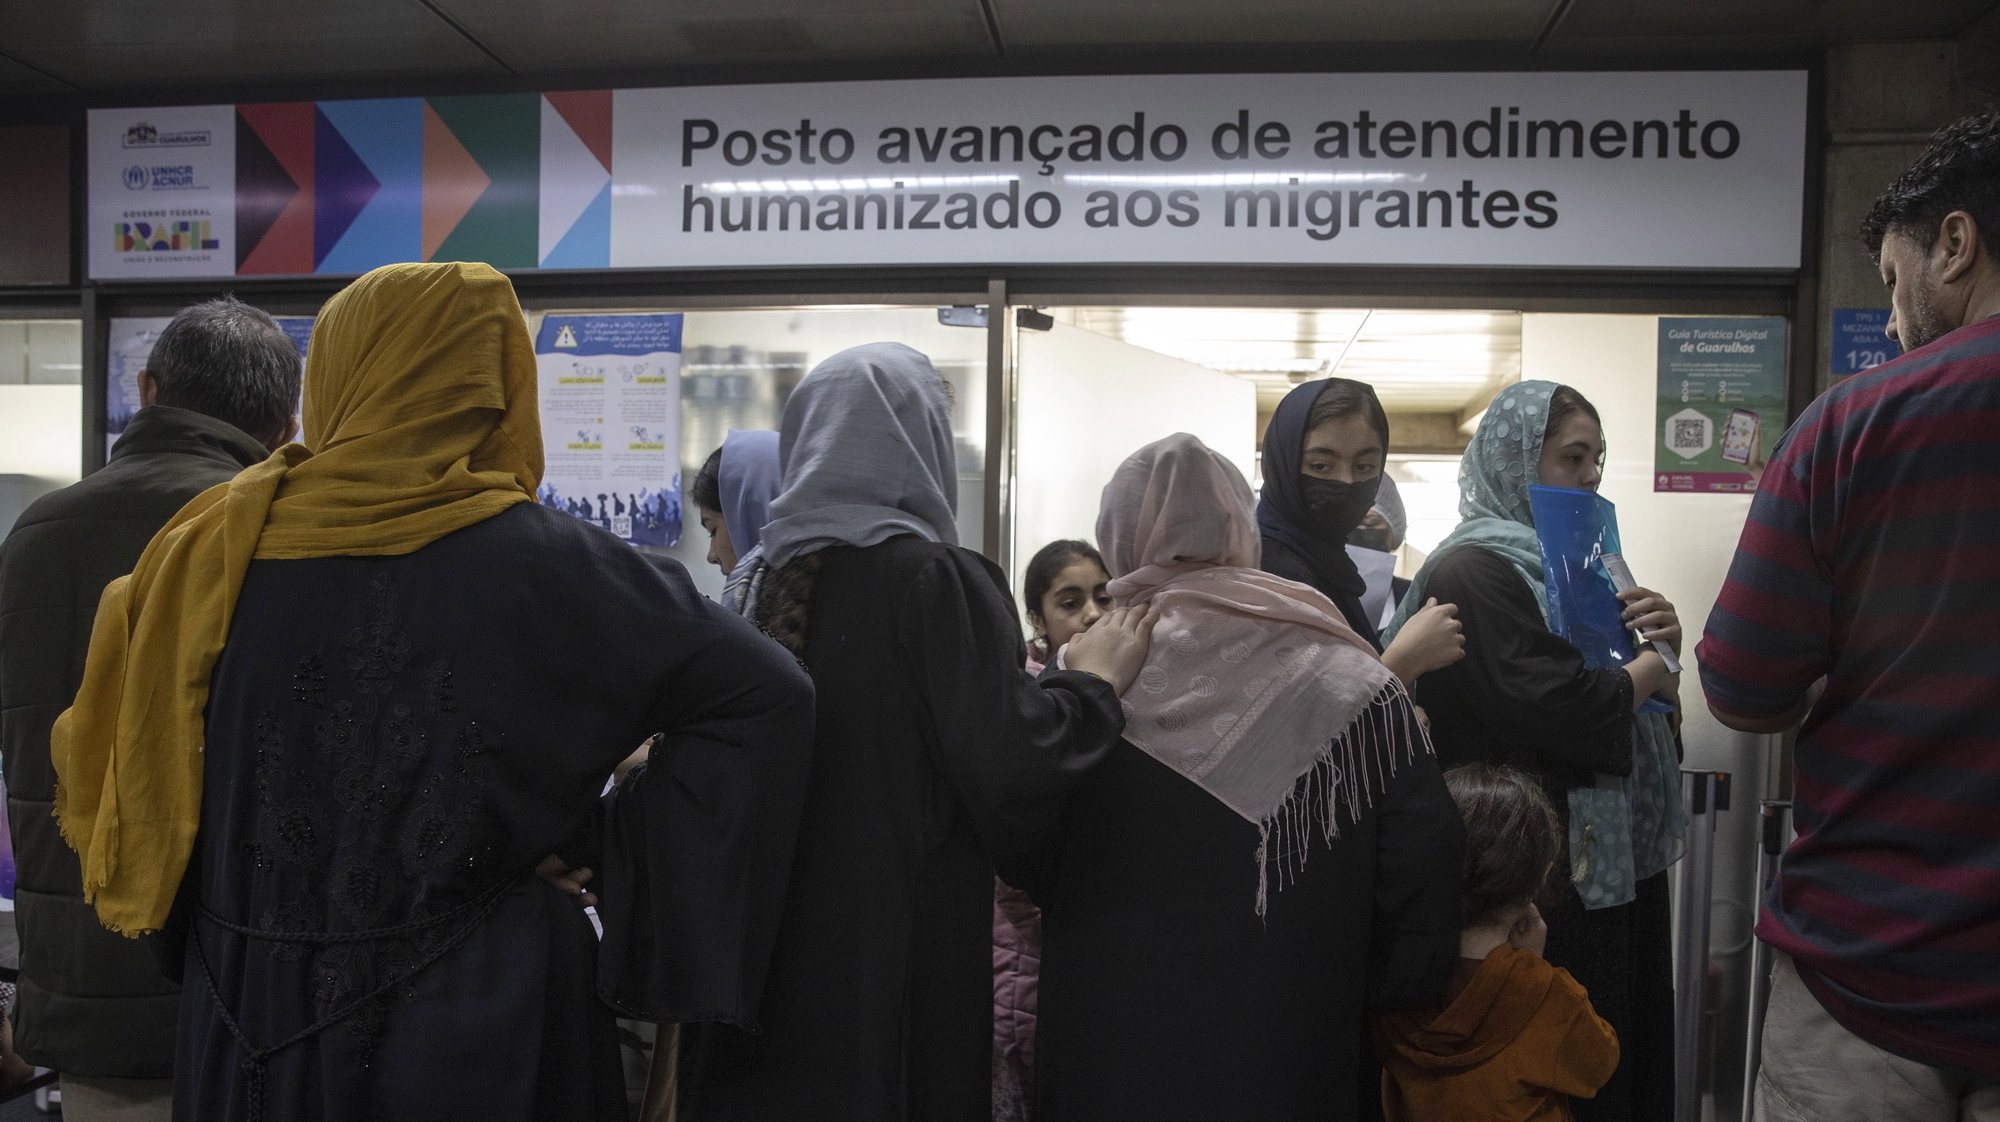 epa10718311 Afghan refugees queue at a migration assistance post, as they wait for authorities to offer them a place to rest, inside the international airport of Sao Paulo, Brazil, 29 June 2023. The sense of emergency has grown in recent days, after a doctor sent by the City Council discovered that a family in the camp had scabies infection. Since September 2021, the Brazilian government has offered a humanitarian visa to those fleeing the Taliban regime to allow them to travel to the South American country and, once there, apply for refugee status or a residence permit.  EPA/Sebastiao Moreira